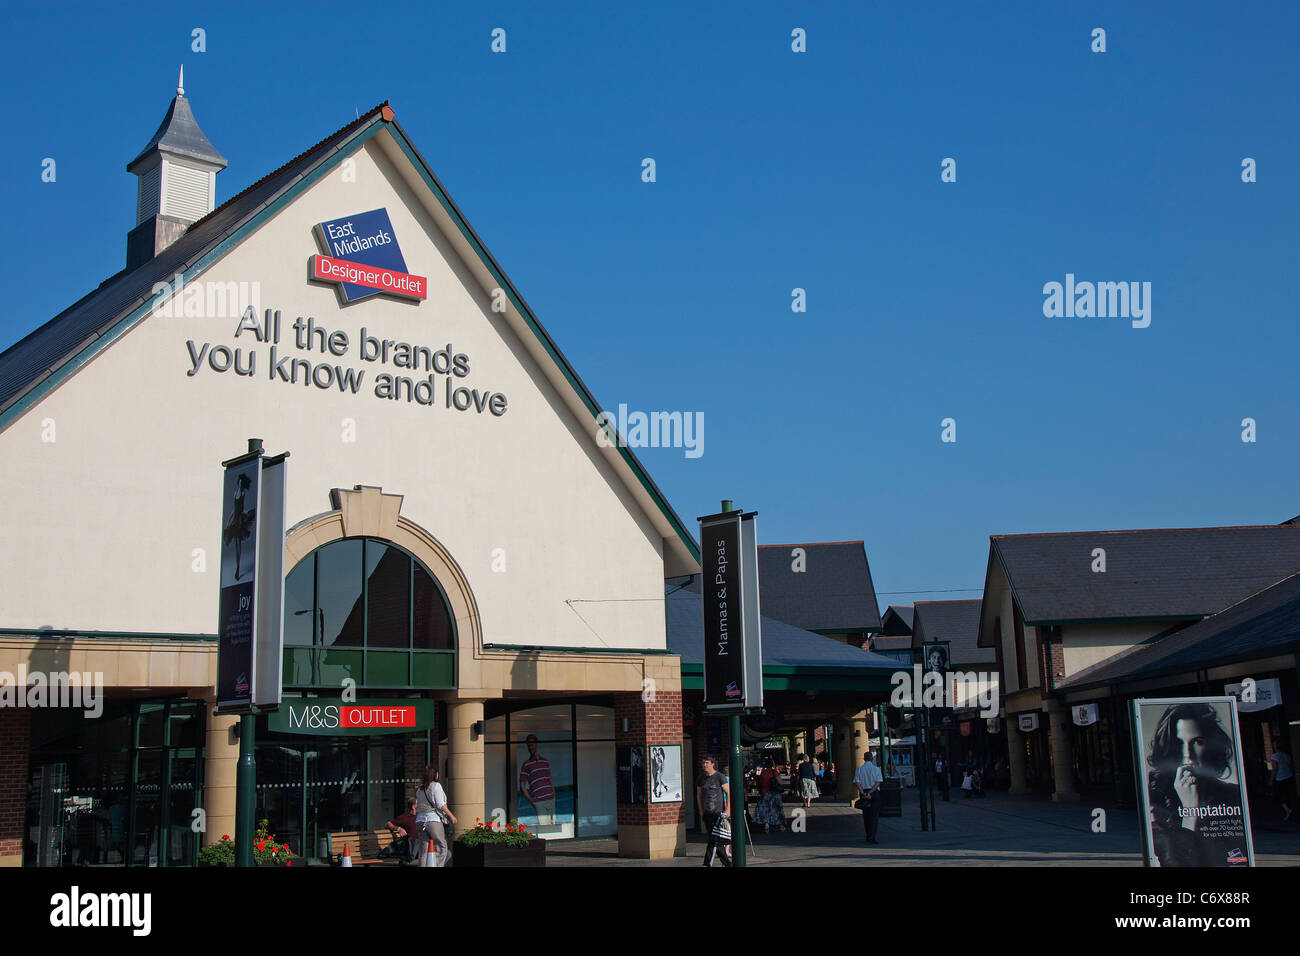 East Midlands Designer Outlet Shopping Centre, Pinxton, South Stock Photo, Royalty Free Image ...